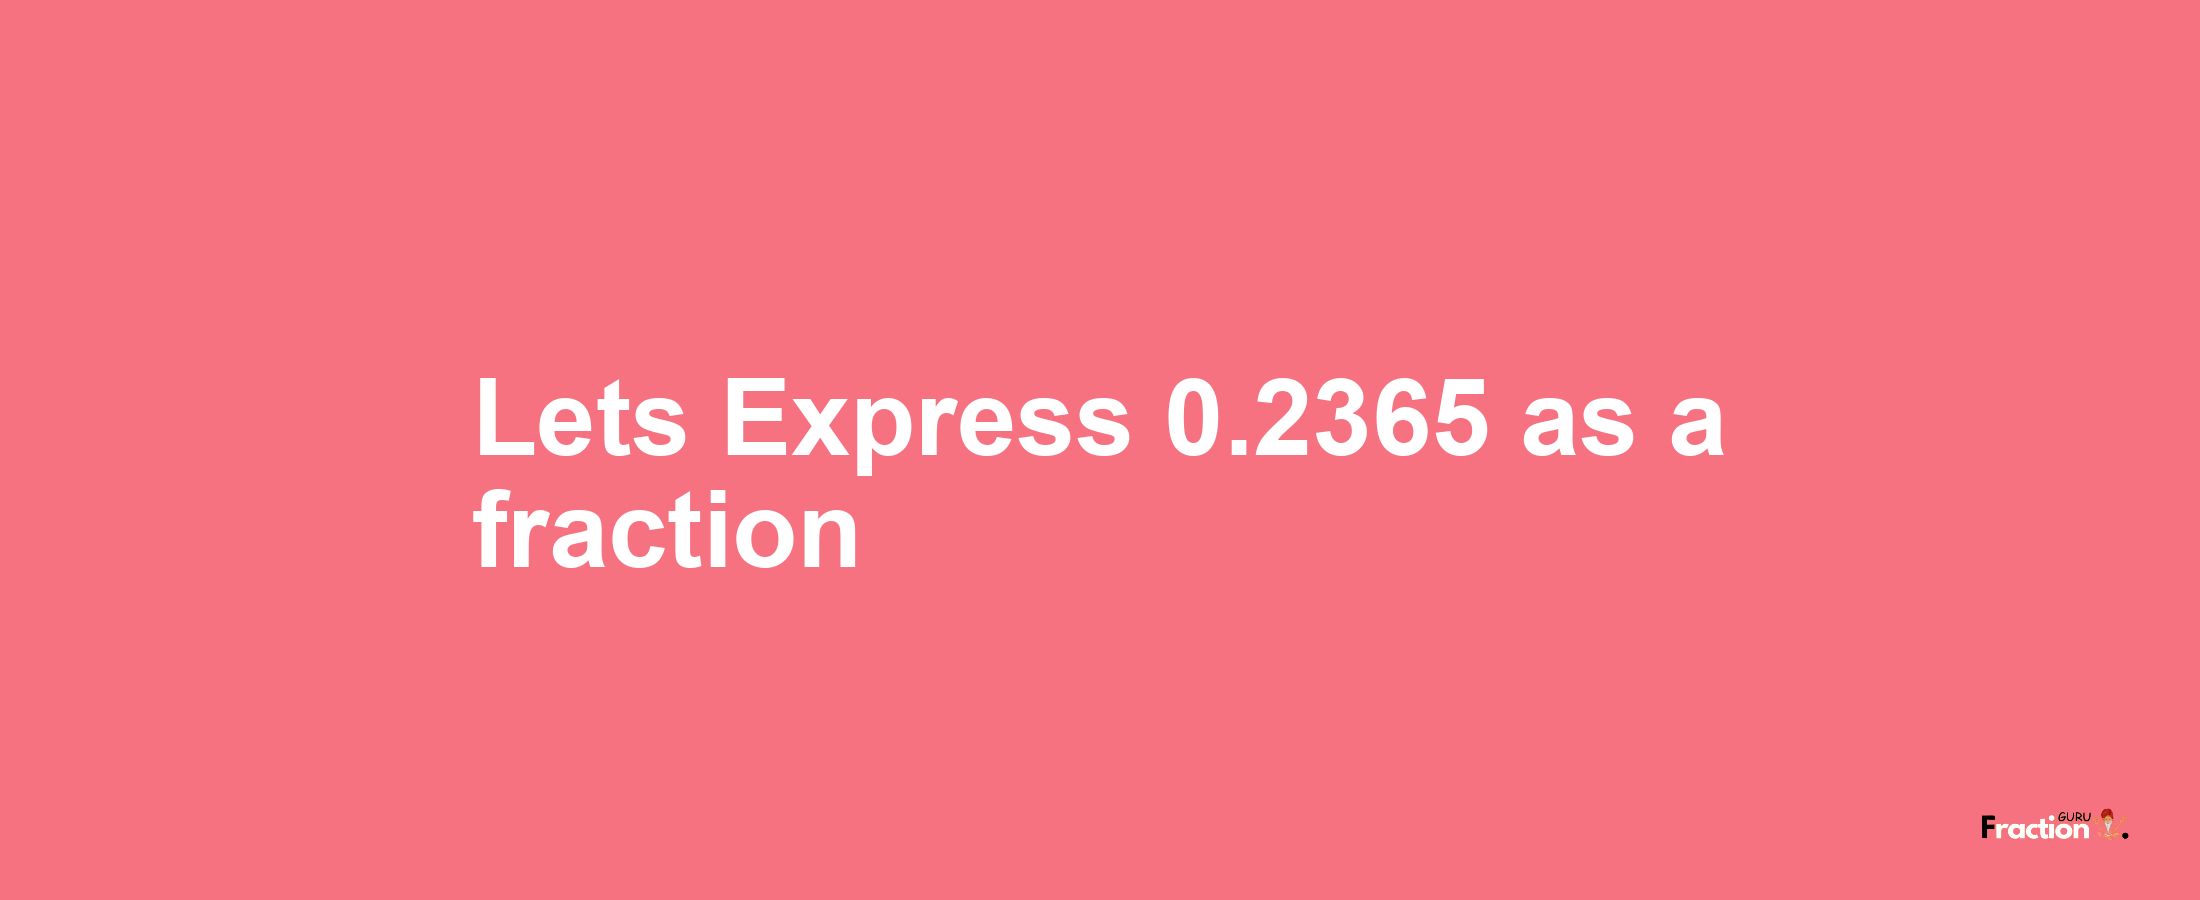 Lets Express 0.2365 as afraction